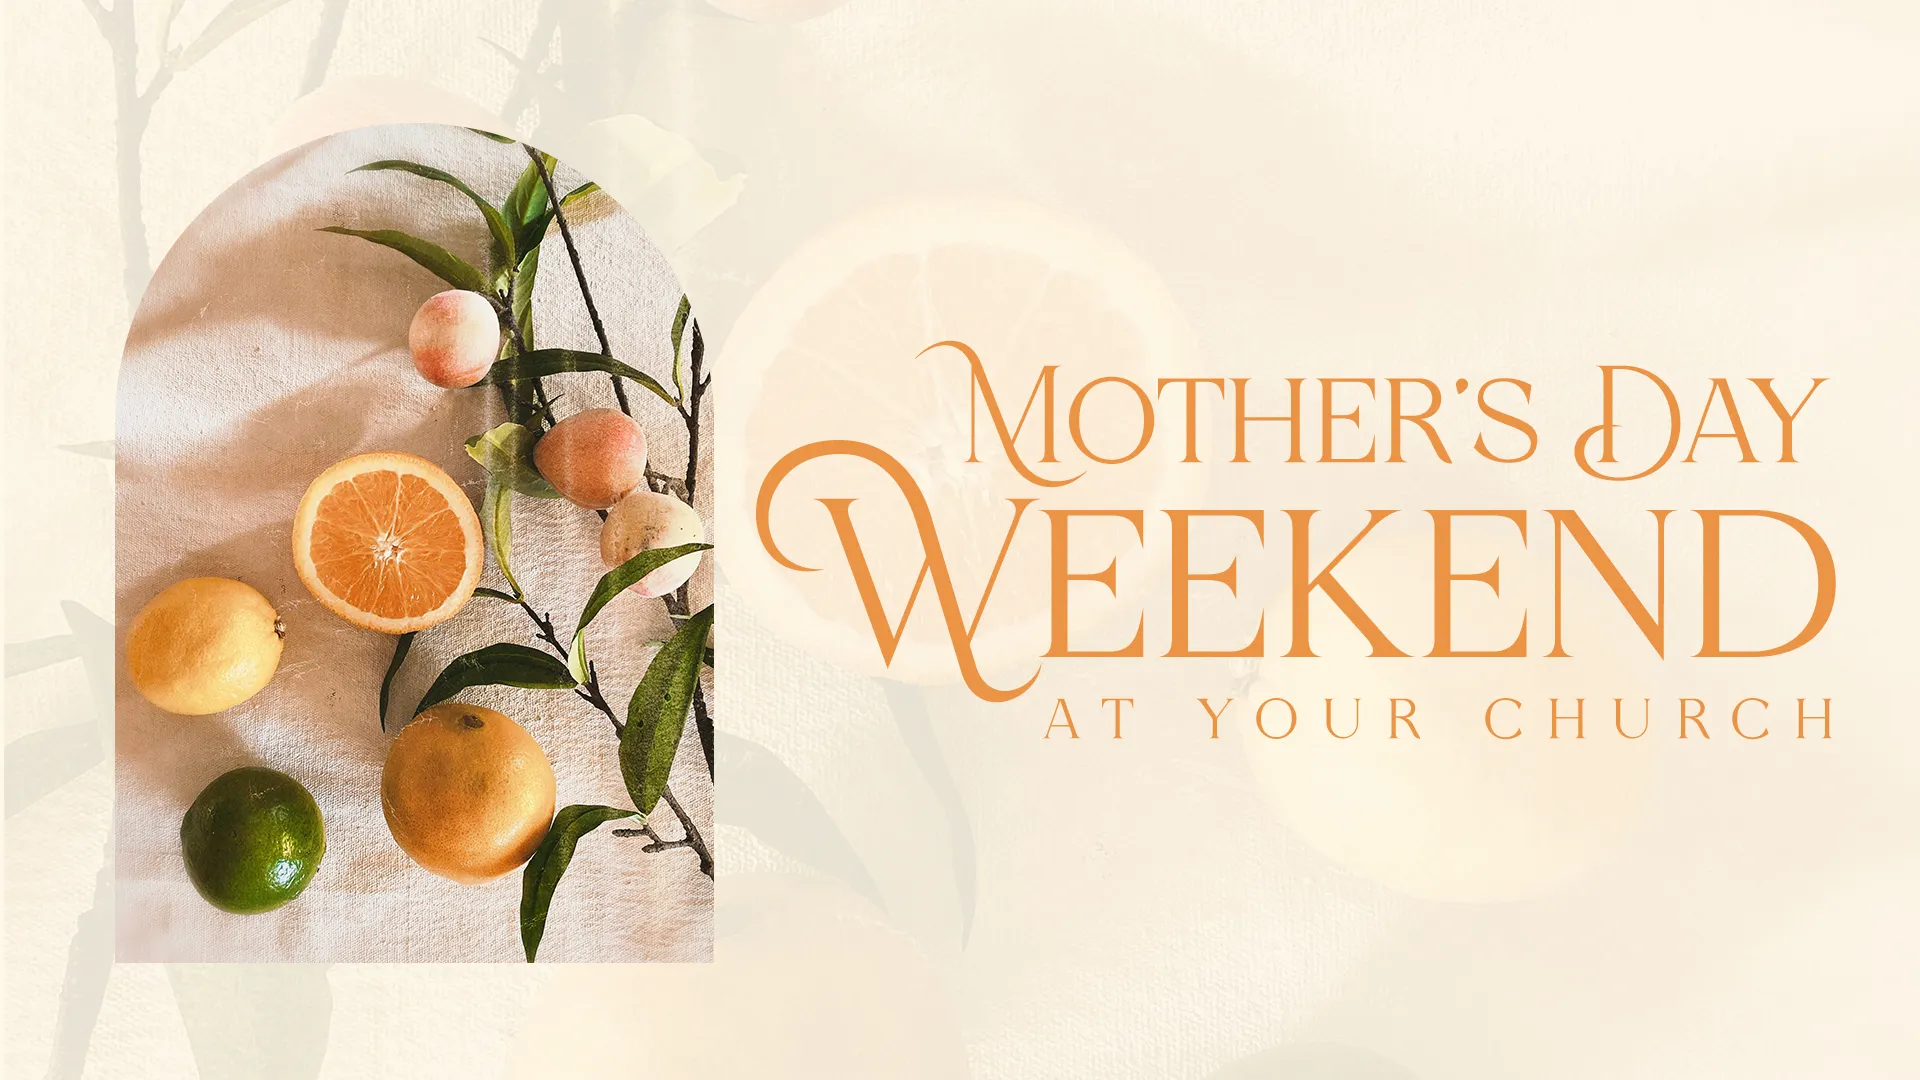 Welcome The Fresh, Vibrant Spirit Of Mother’s Day Weekend With This Nature-Inspired Graphic, Featuring Lush Citrus And A Serene Backdrop. It’s A Refreshing And Elegant Invitation For Church Celebrations Dedicated To Honoring Mothers.